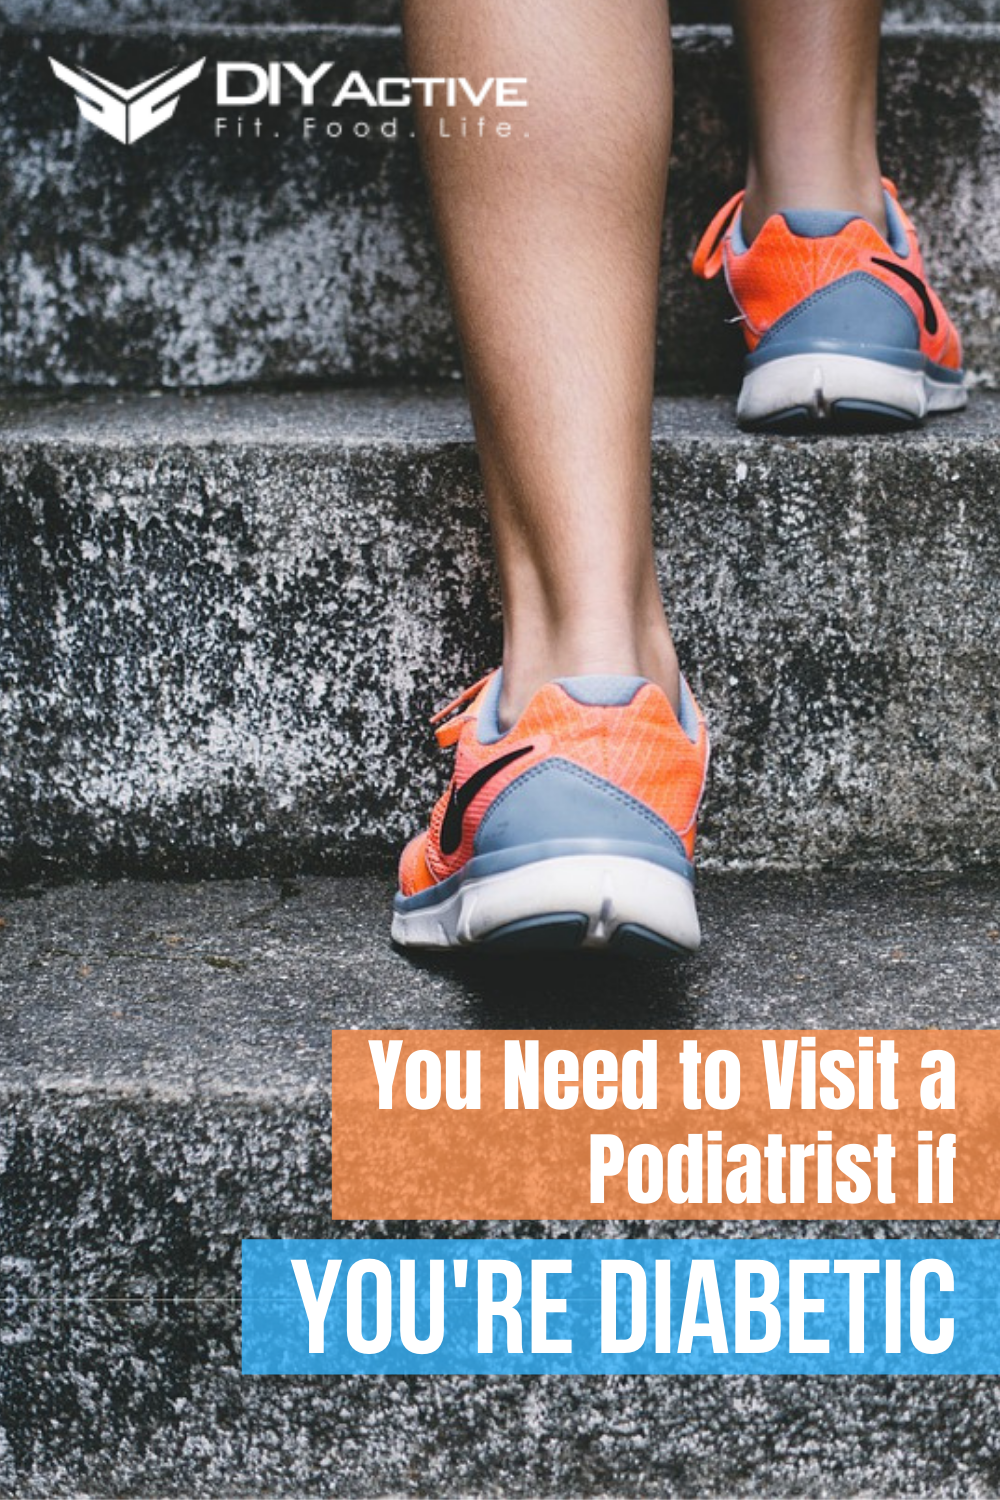 You Need to Visit a Podiatrist if You're Diabetic. Here's Why!